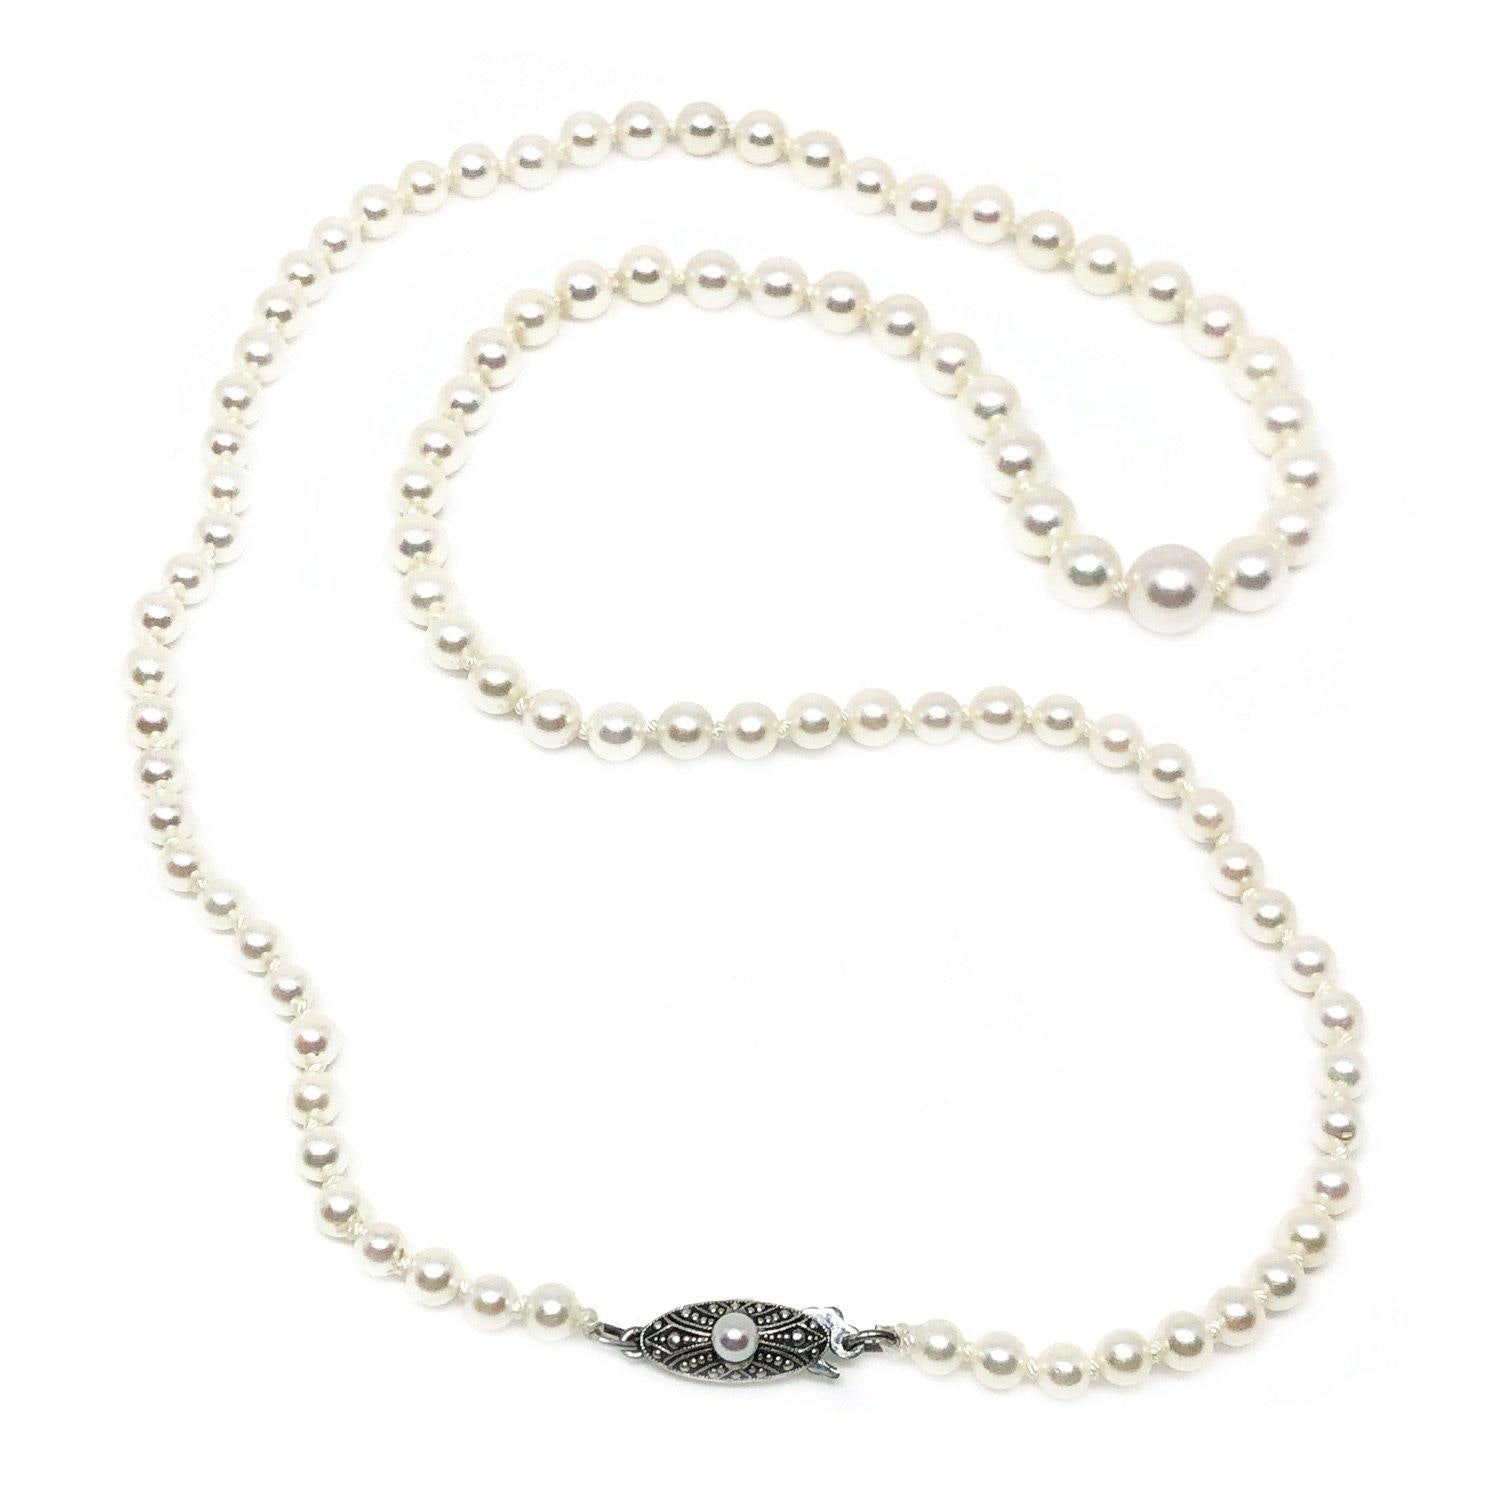 Mikimoto Graduated Japanese Cultured Akoya Pearl Beaded Strand - Sterling Silver 20 Inch